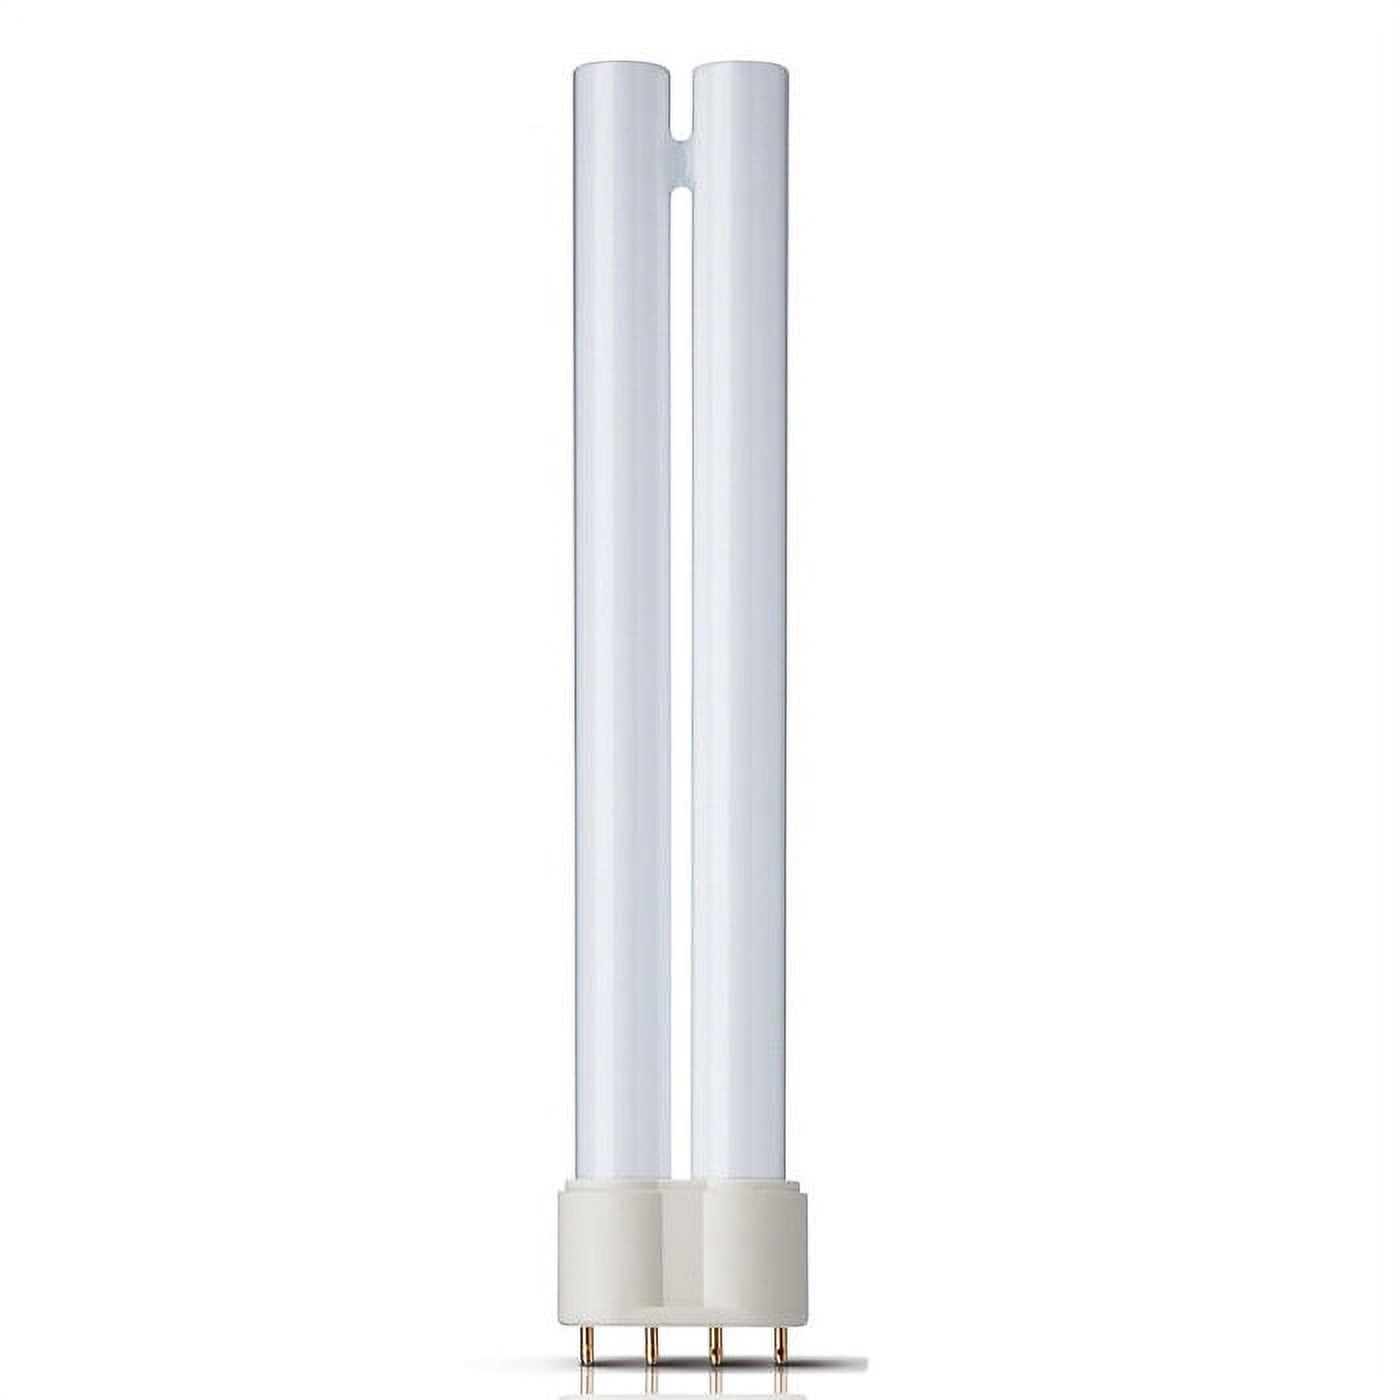 Philips 108266278 Actinic PL-L 36W/10/4P lamp 36w 4-Pin 2G11 base UV Bulb - image 1 of 4